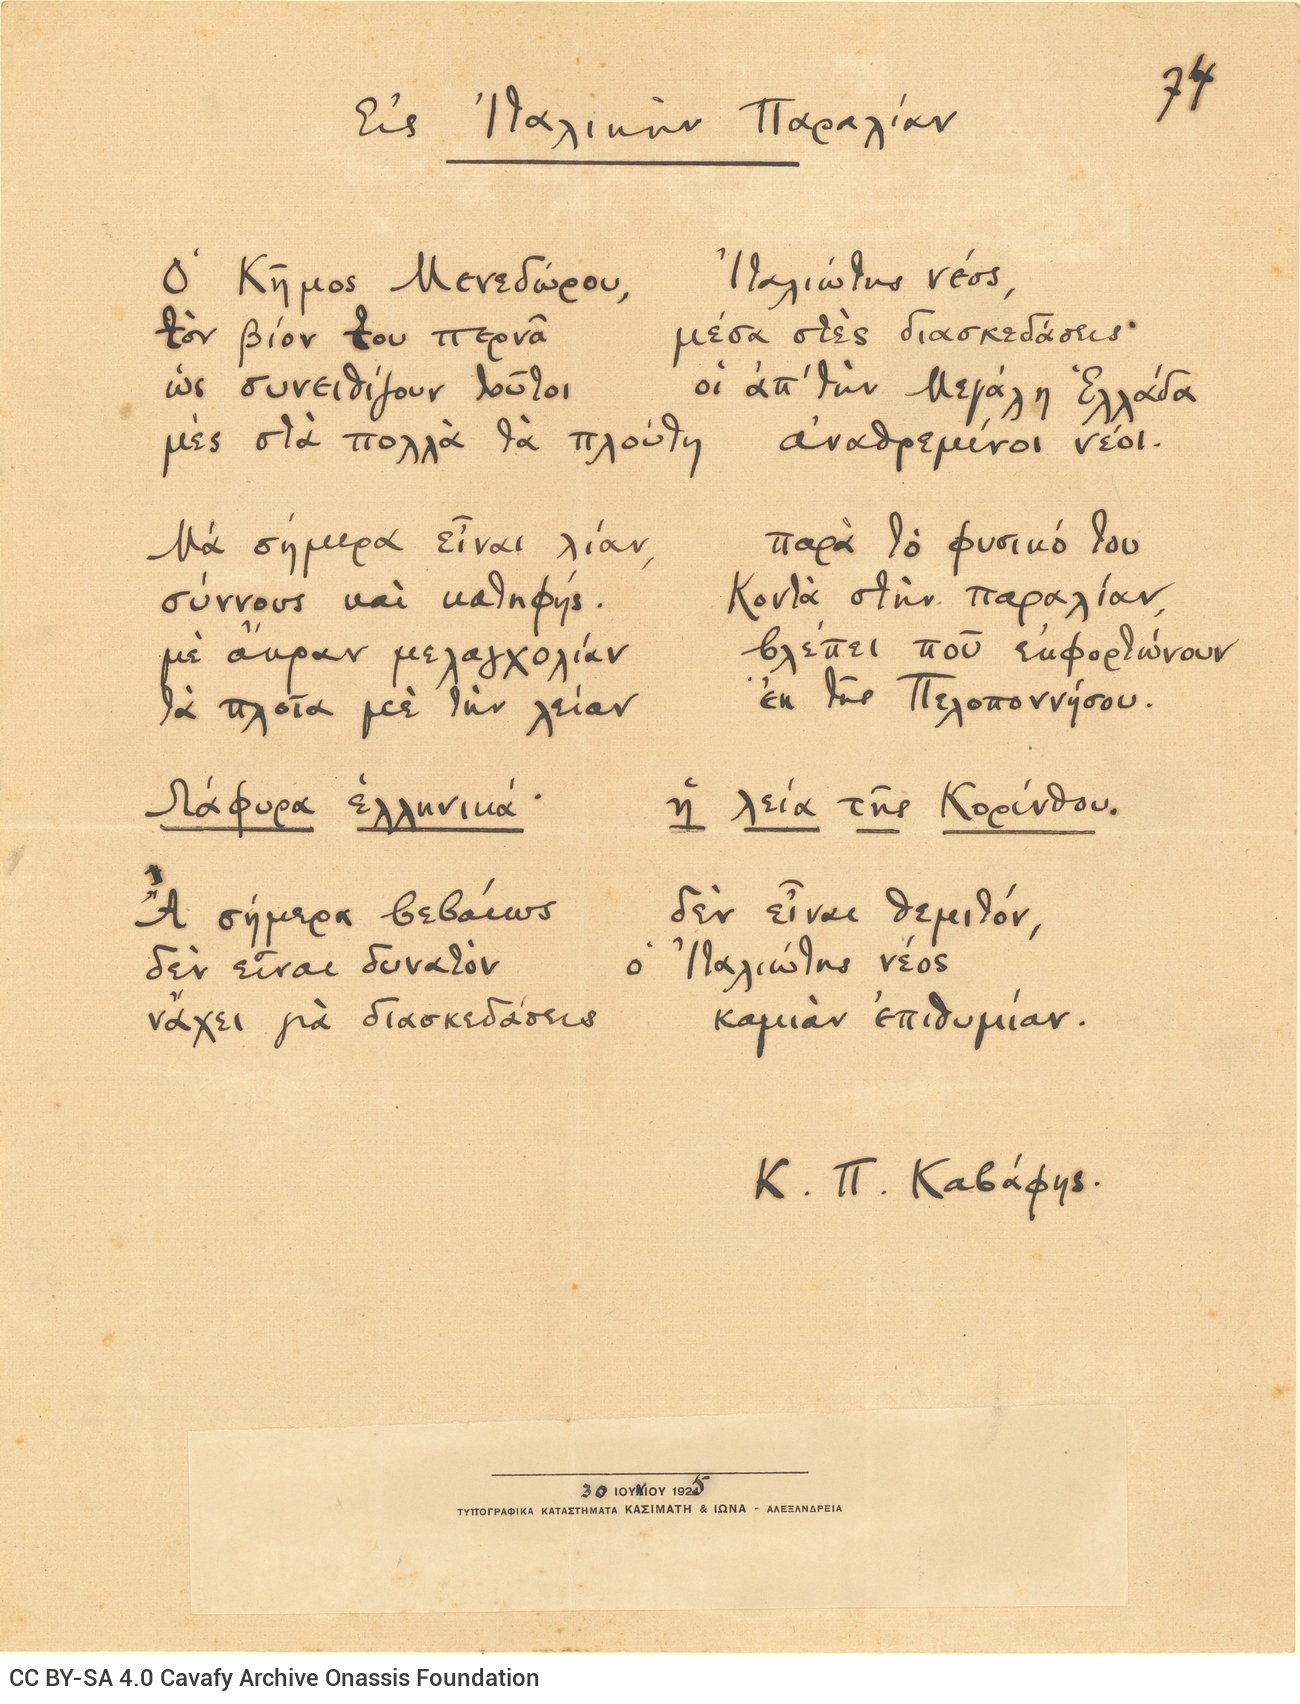 Autograph manuscript of the poem "On the Italian Seashore" on one side of a ruled sheet. At the bottom, affixed piece of pape